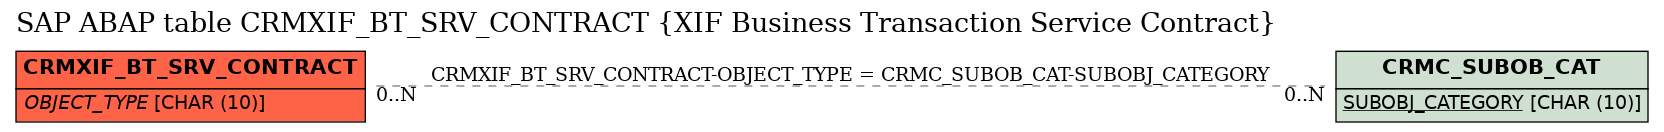 E-R Diagram for table CRMXIF_BT_SRV_CONTRACT (XIF Business Transaction Service Contract)